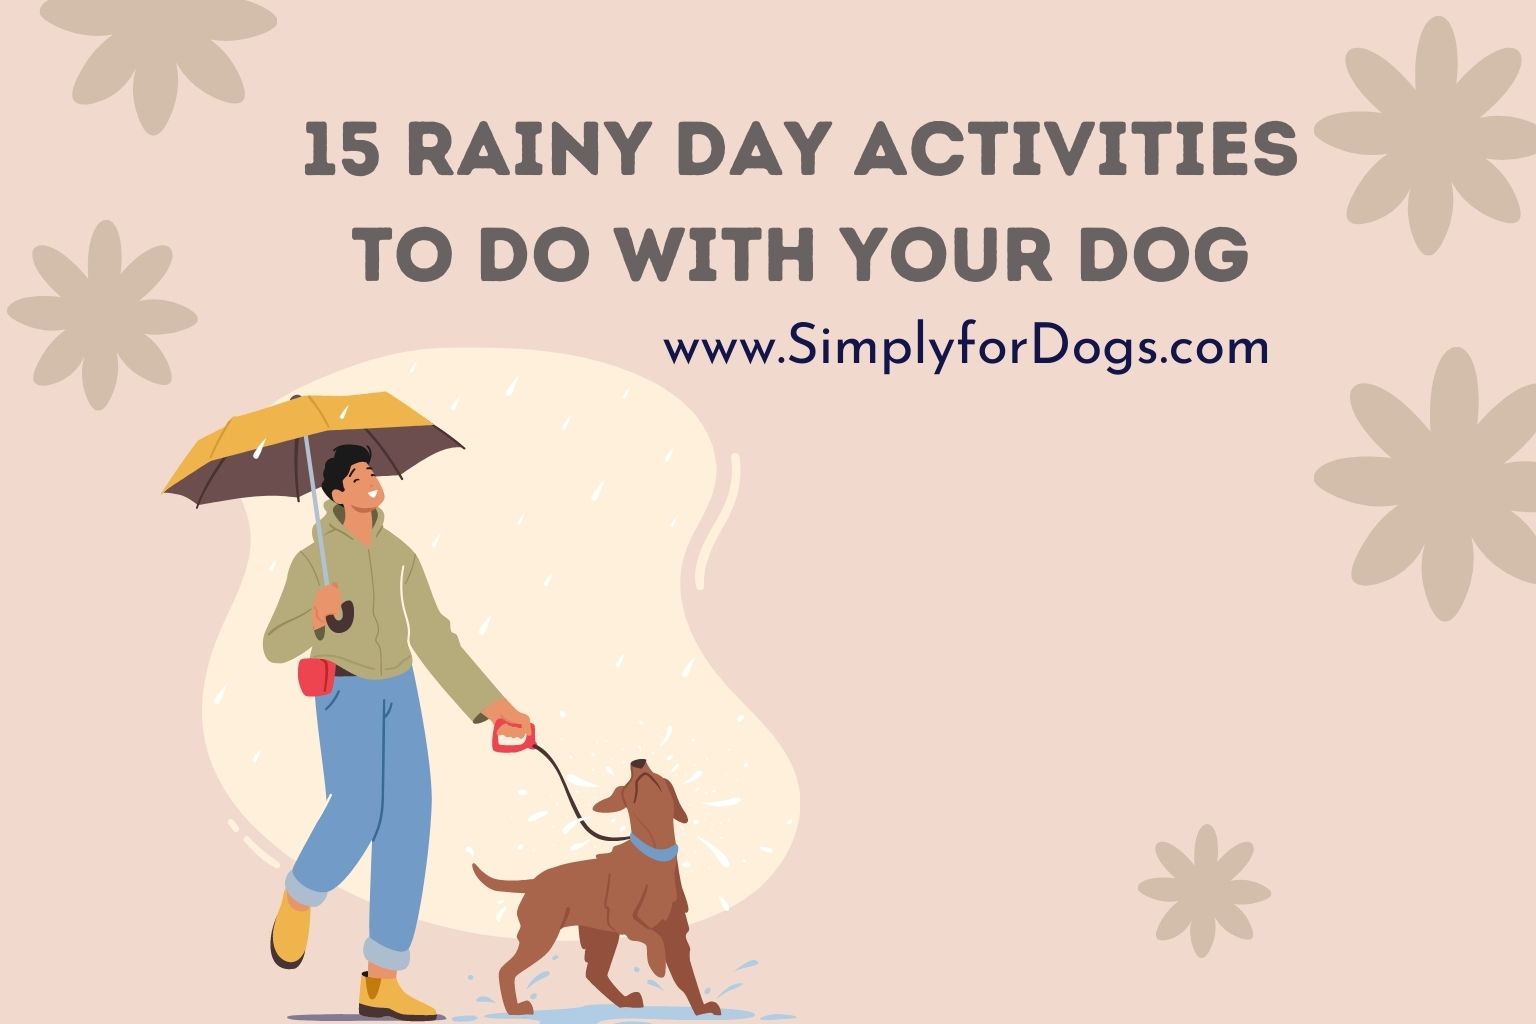 15 Rainy Day Activities to Do with Your Dog